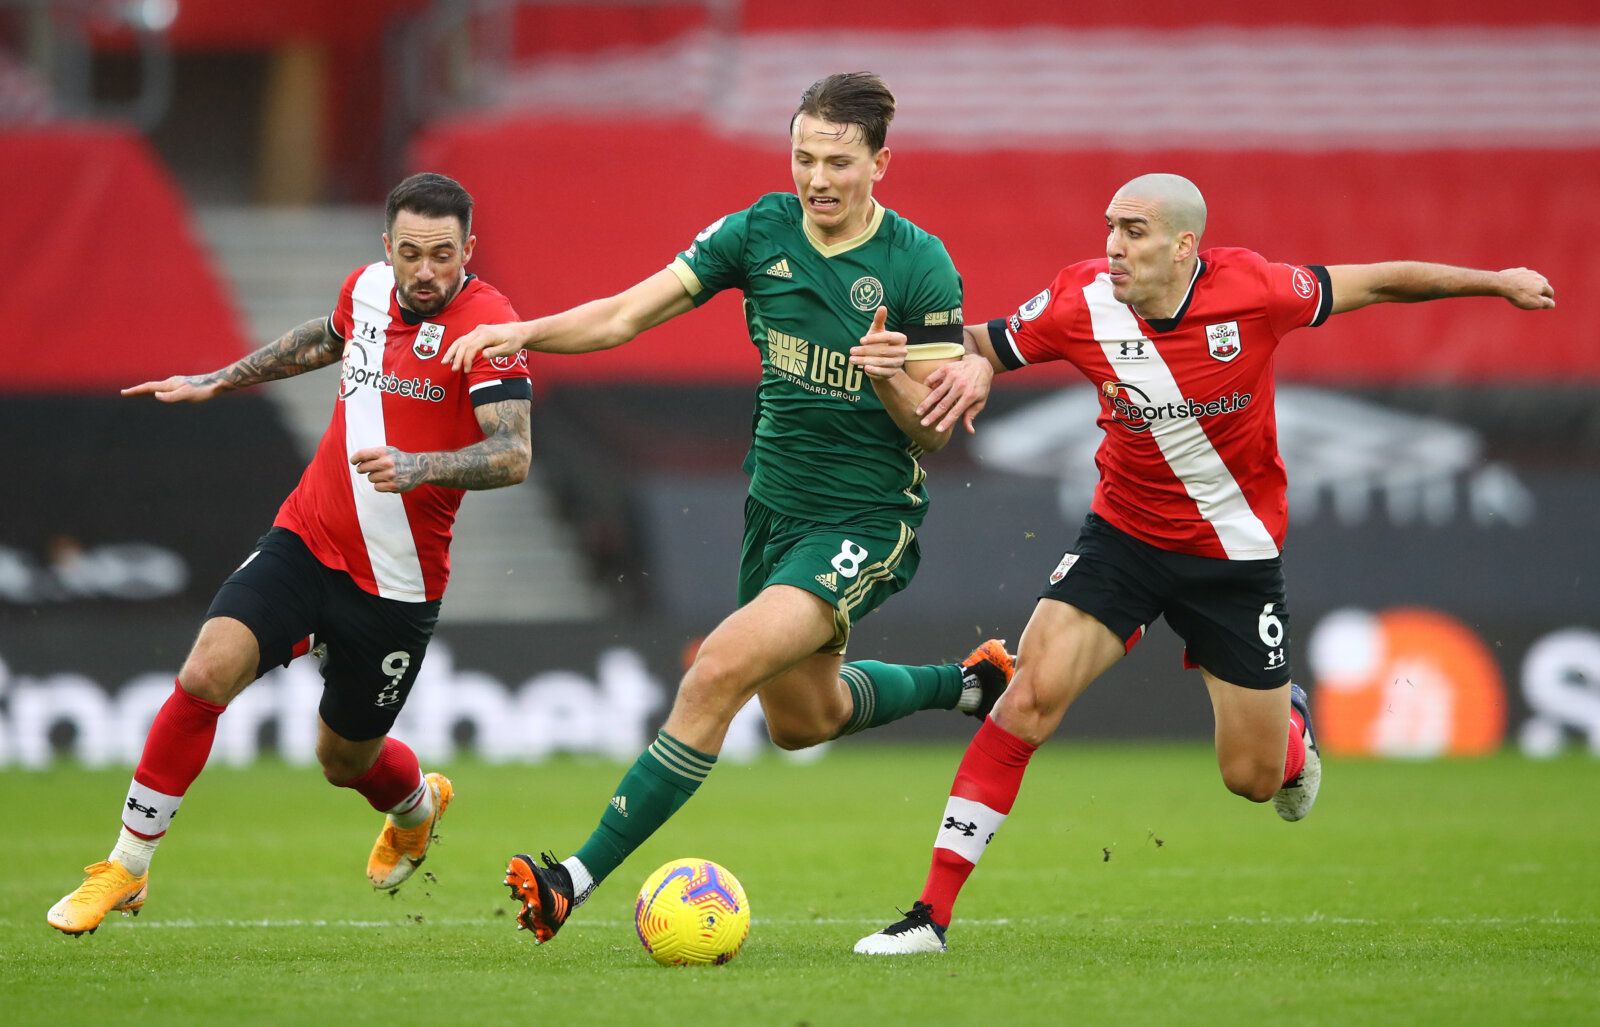 Soccer Football - Premier League - Southampton v Sheffield United - St Mary's Stadium, Southampton, Britain - December 13, 2020 Southampton's Oriol Romeu and Danny Ings in action with Sheffield United's Sander Berge Pool via REUTERS/Michael Steele EDITORIAL USE ONLY. No use with unauthorized audio, video, data, fixture lists, club/league logos or 'live' services. Online in-match use limited to 75 images, no video emulation. No use in betting, games or single club /league/player publications.  Pl